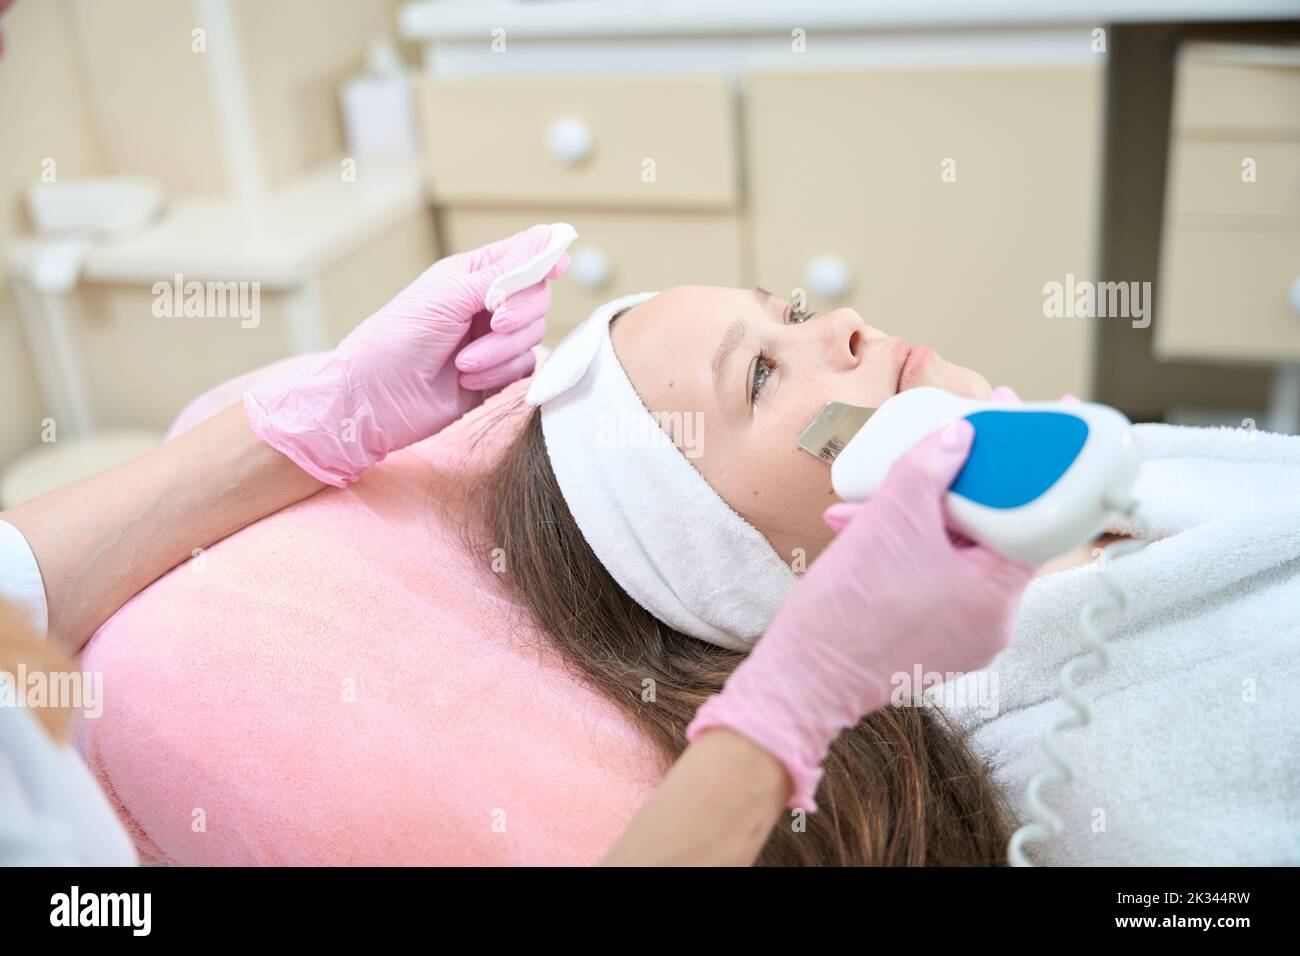 Profile of face of girl during ultrasonic cleaning with scrubber Stock Photo